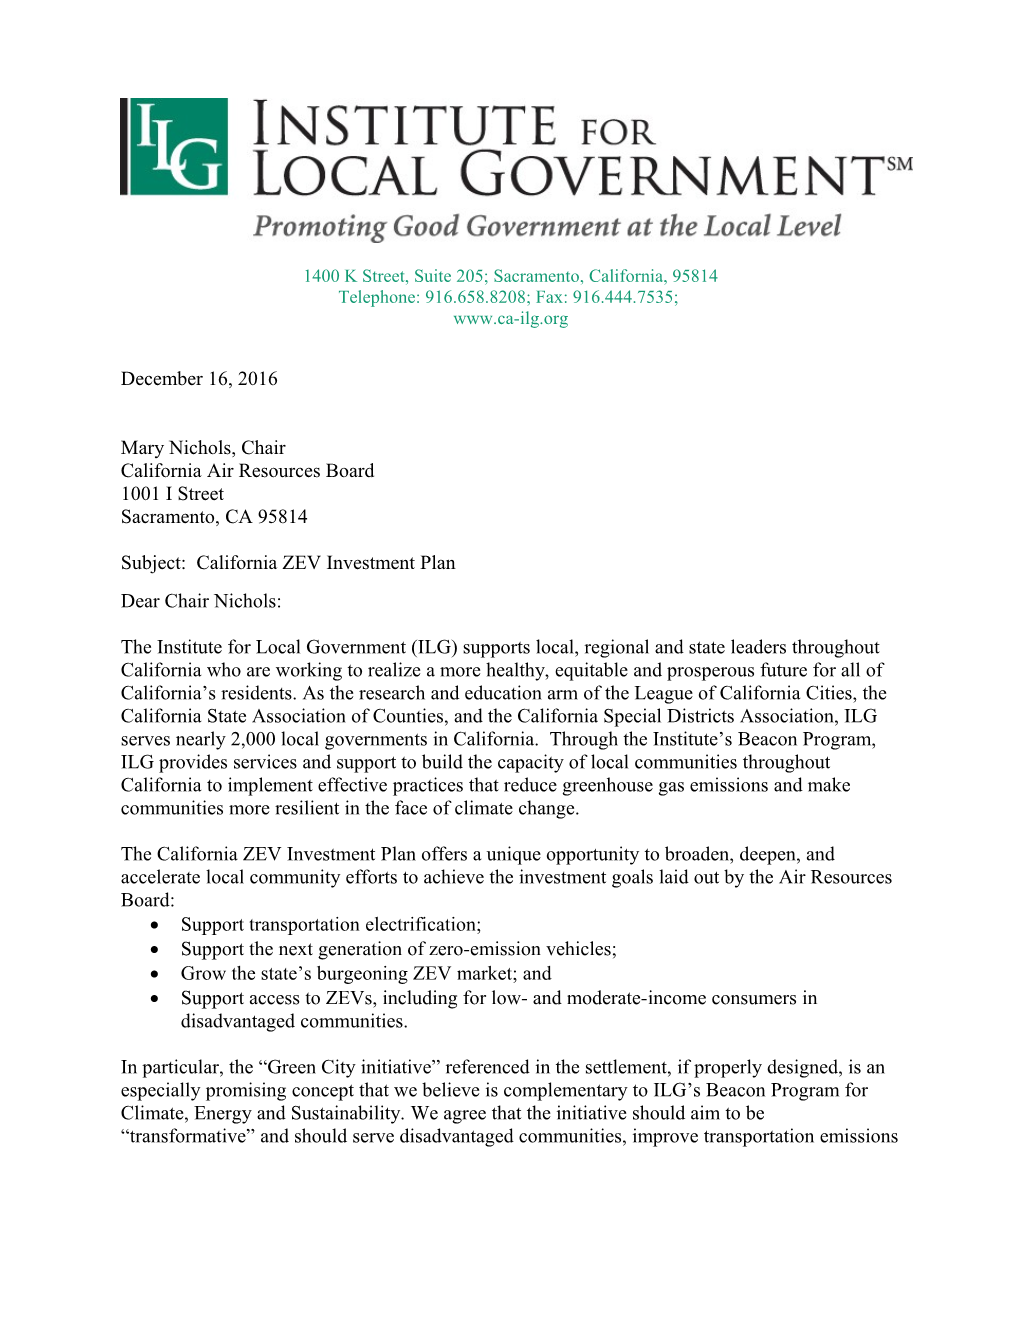 ZEV Investment Plan Comments, Institute for Local Government Page 3